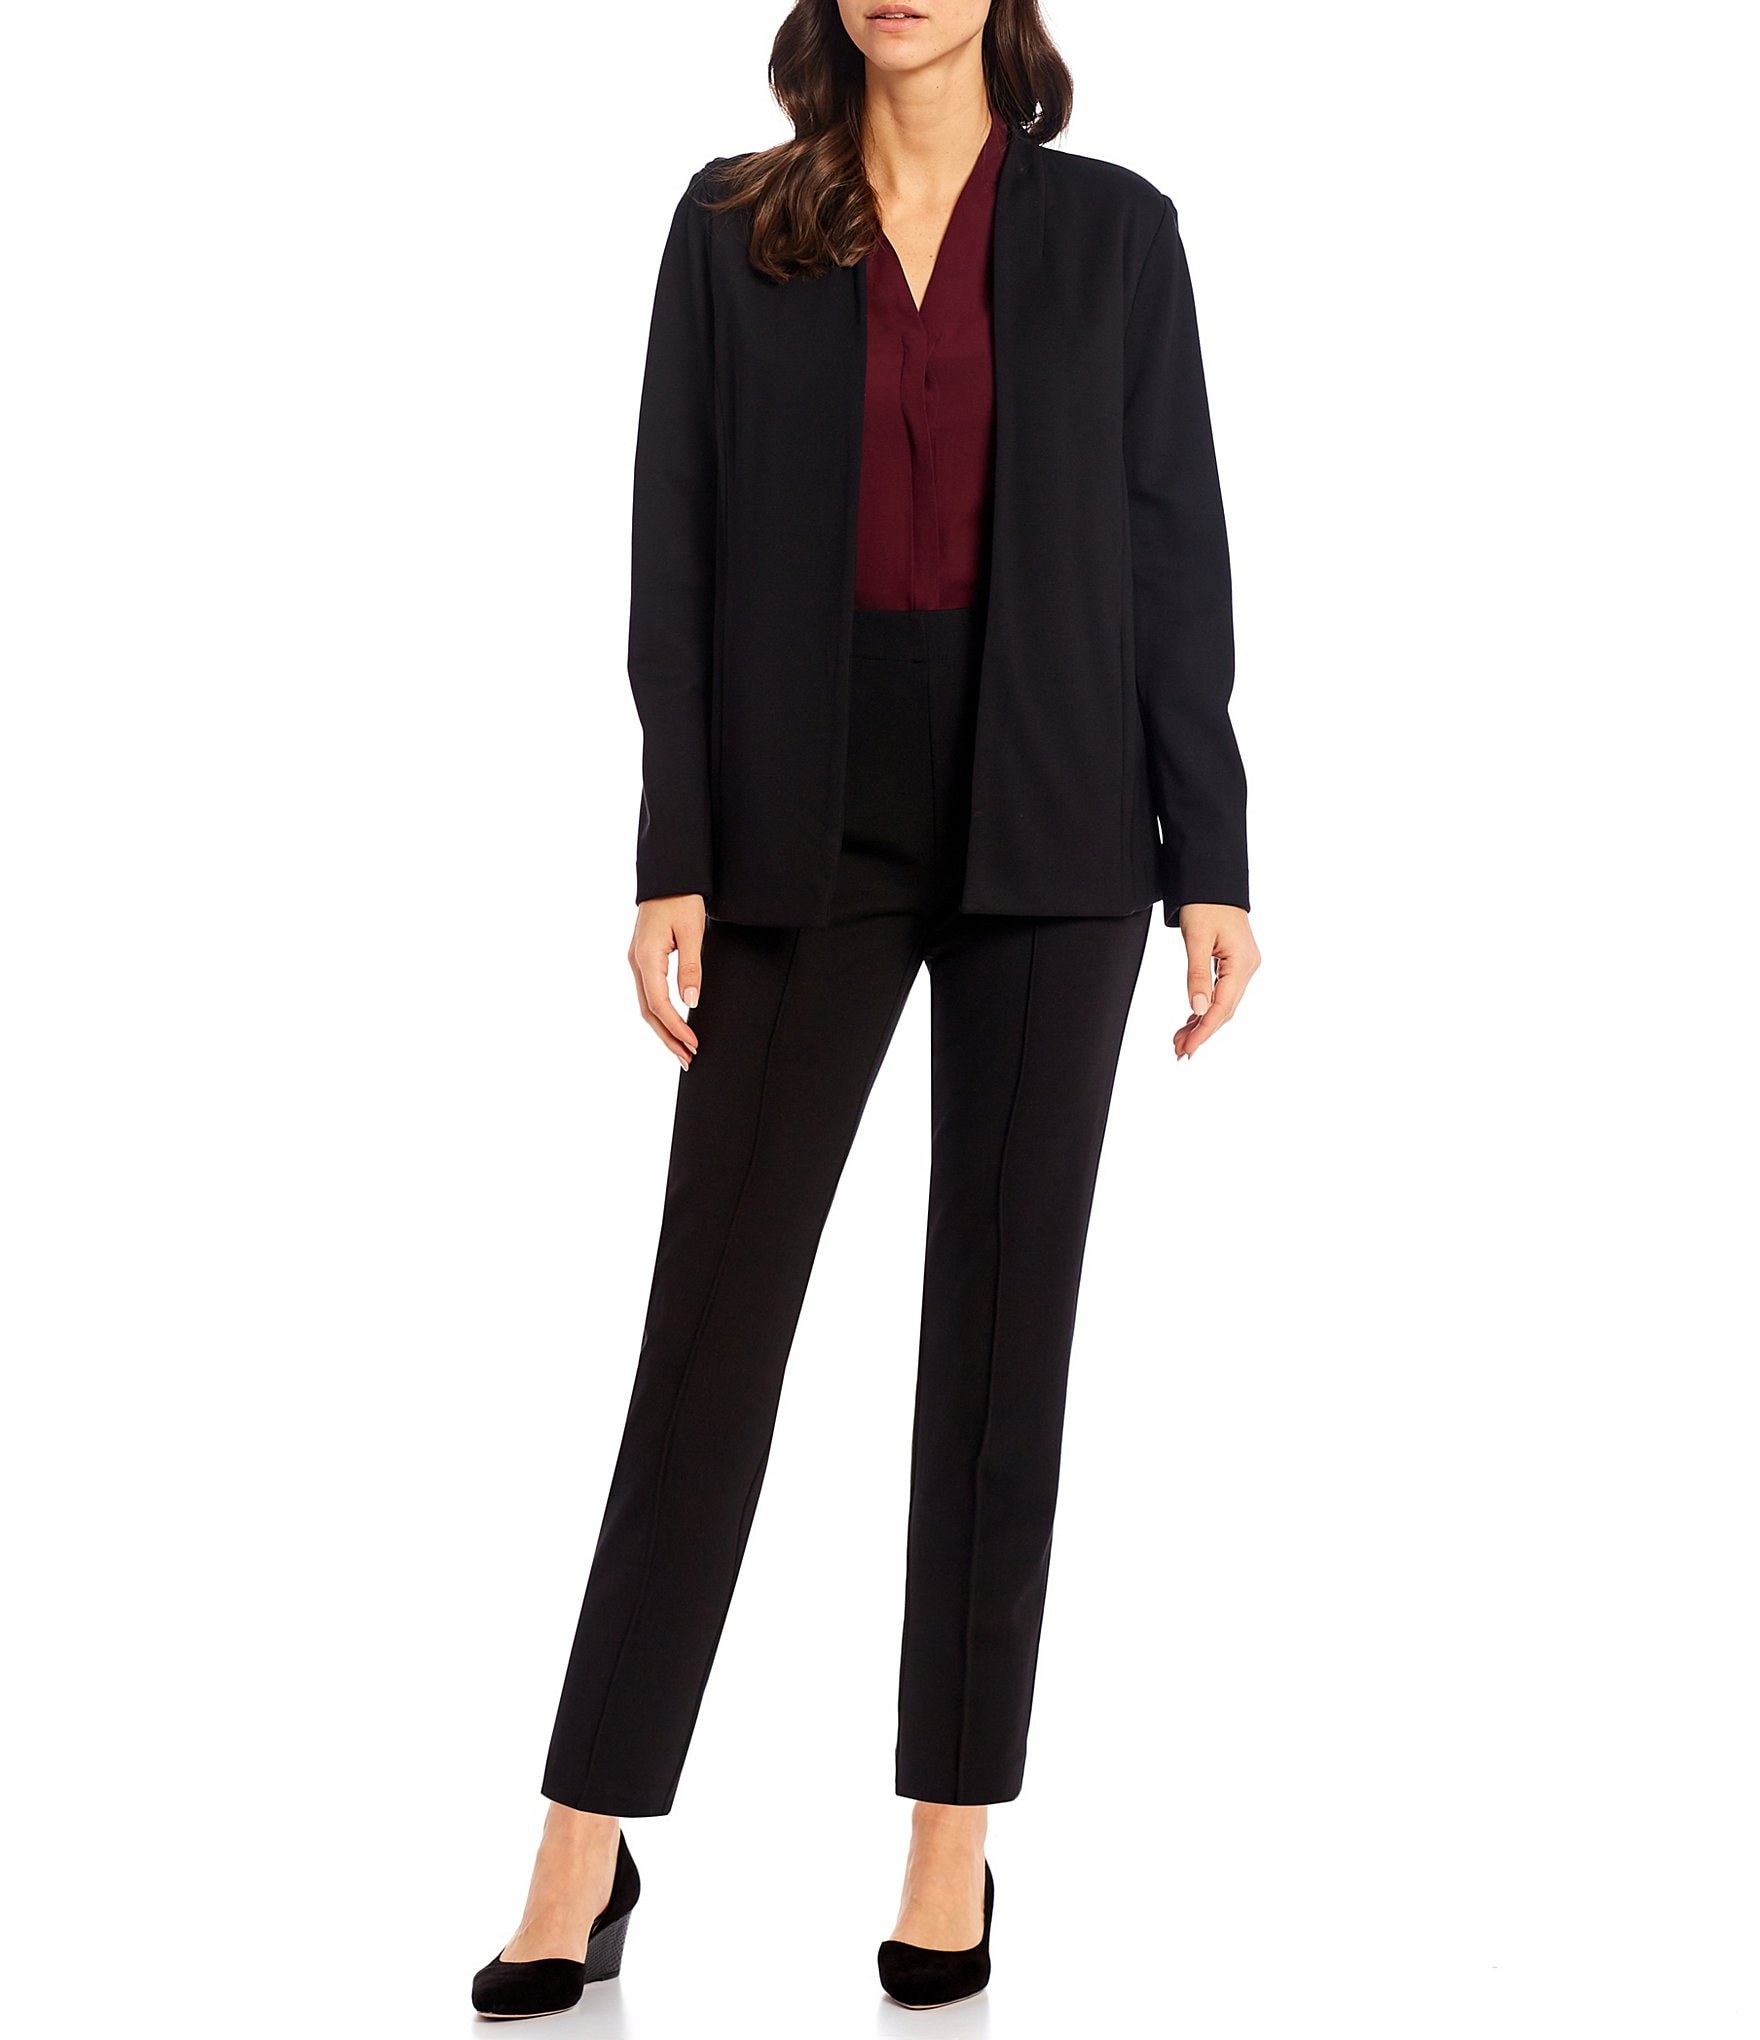 Women's Pink Suits & Separates | Nordstrom